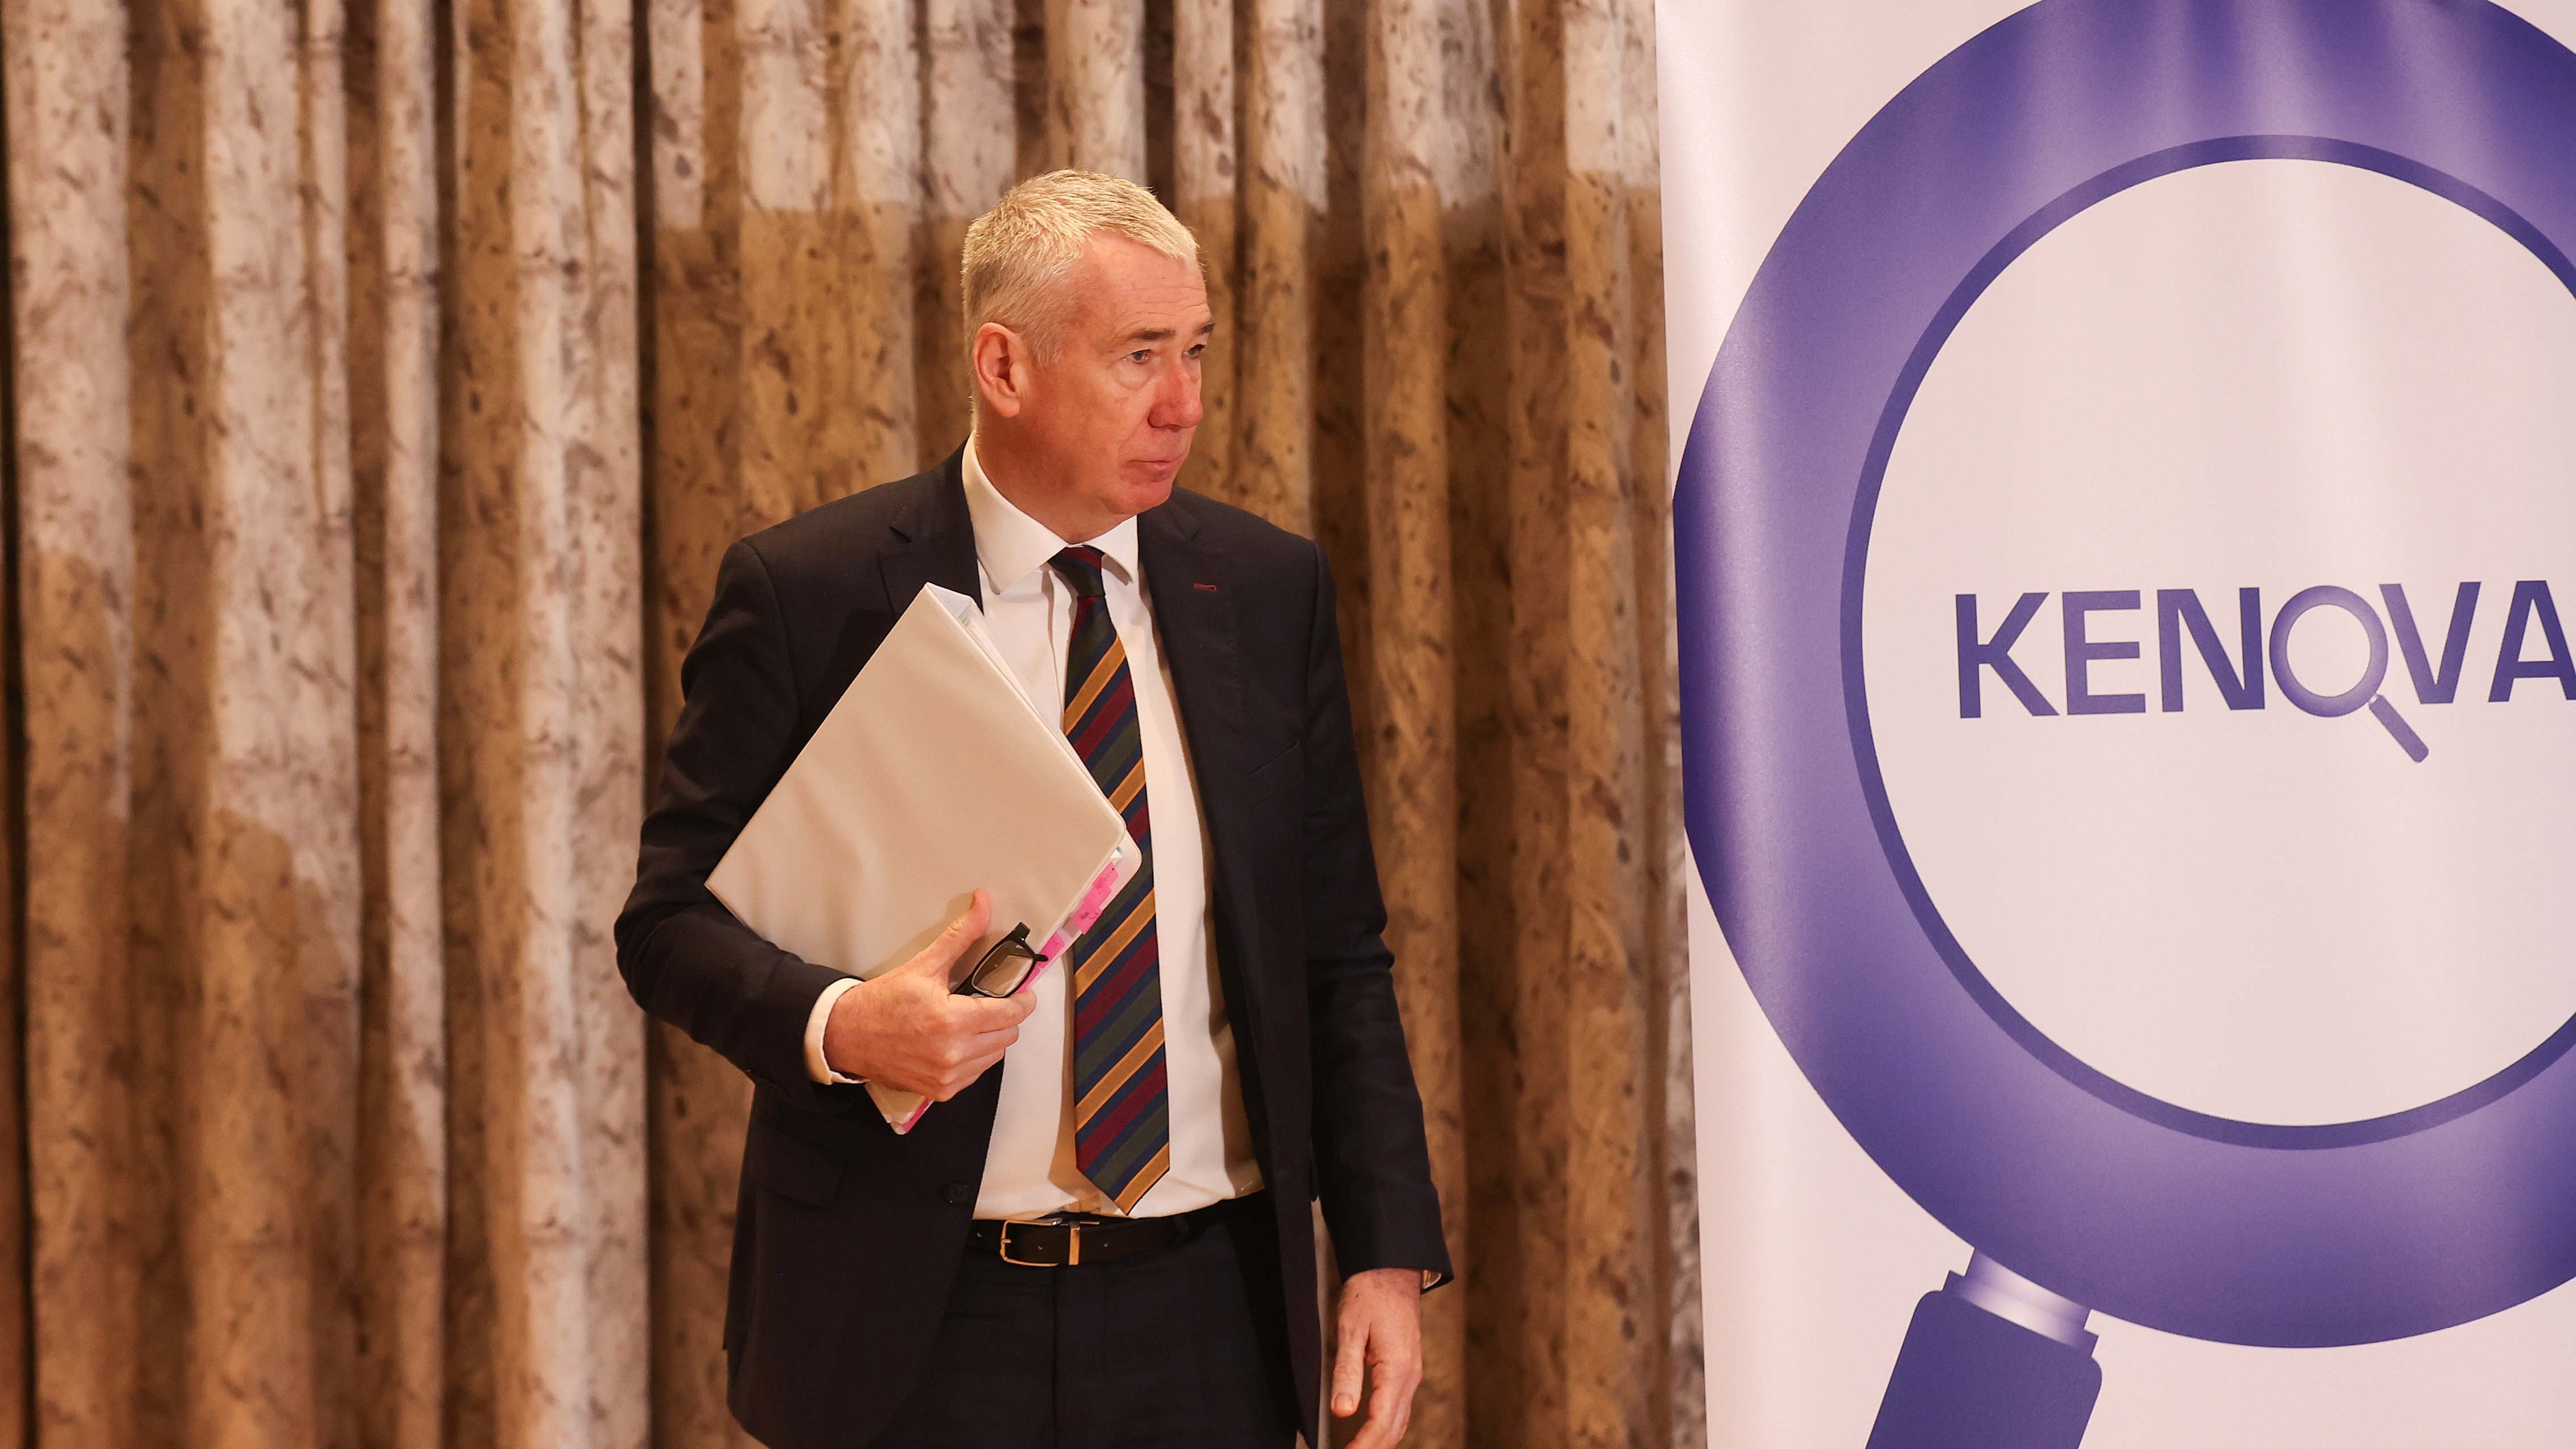 The Operation Kenova report at Stormont Hotel on Friday. The investigation took seven years to examine the activities of agent "Stakeknife", who was Belfast man Freddie Scappaticci.
PICTURE COLM LENAGHAN